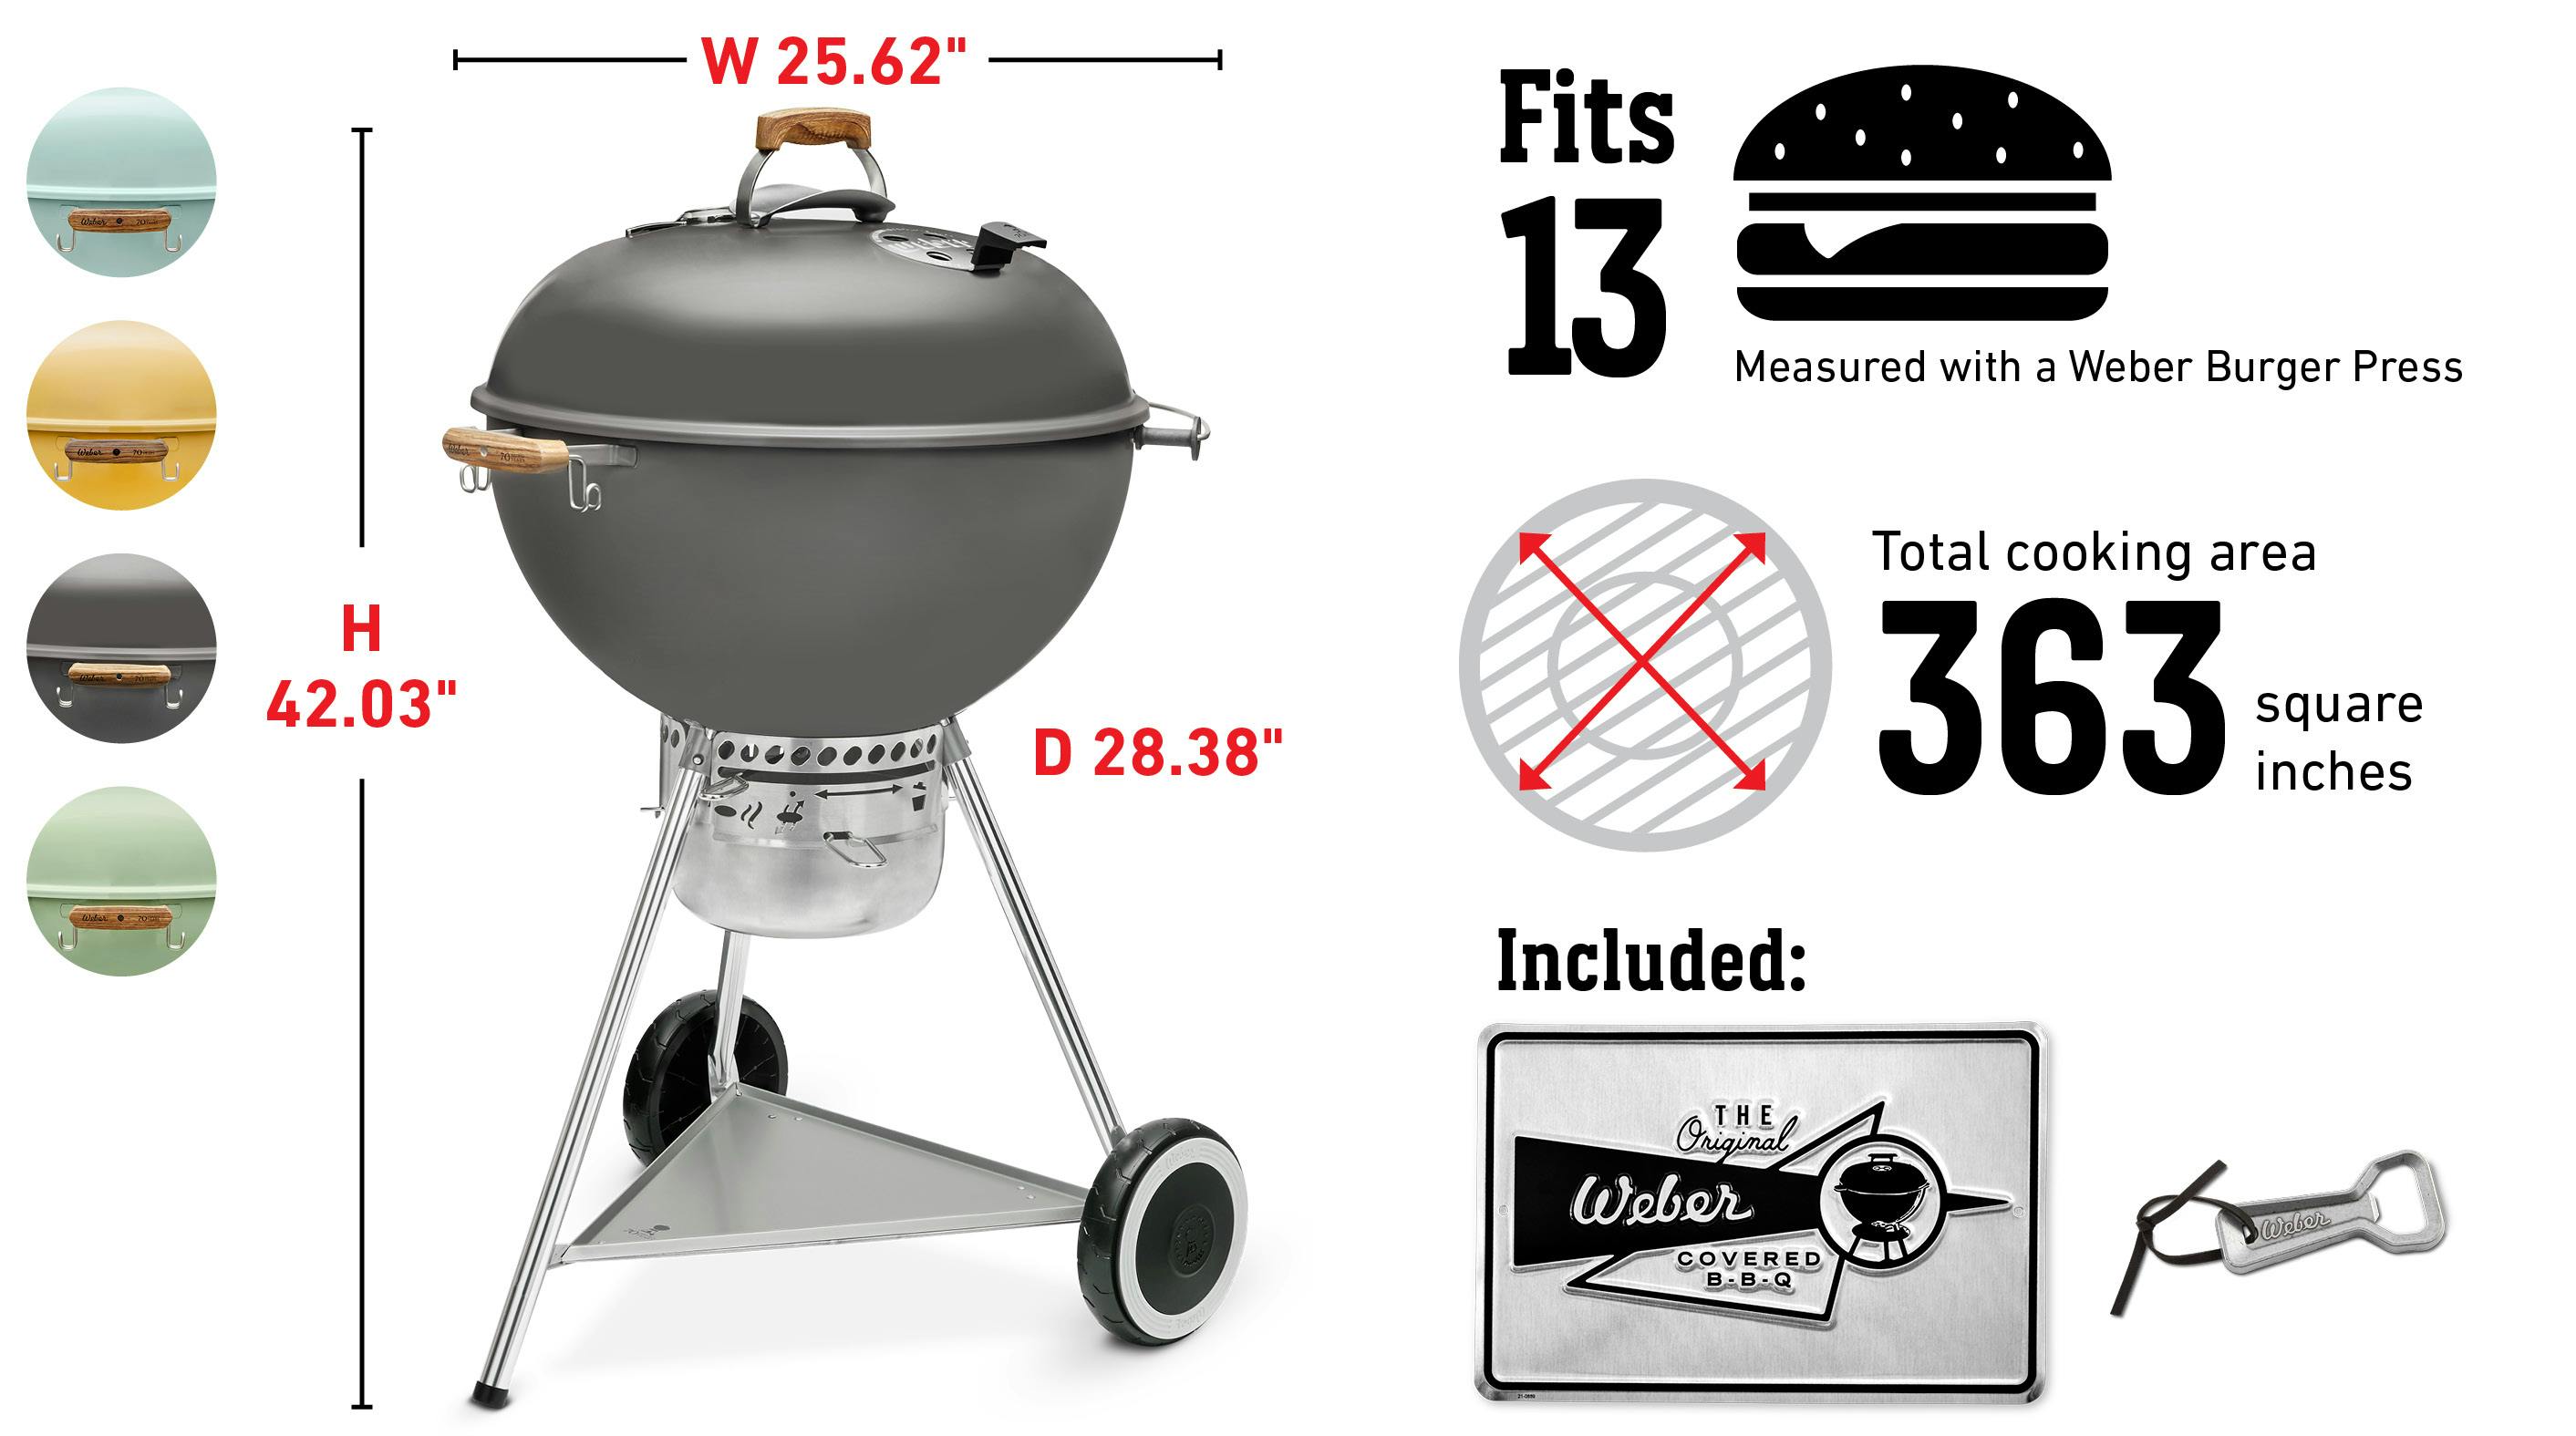 Fits 13 Burgers, measured with a Weber Burger Press, 363 square inches total cooking area, built in thermometer, char-baskets included